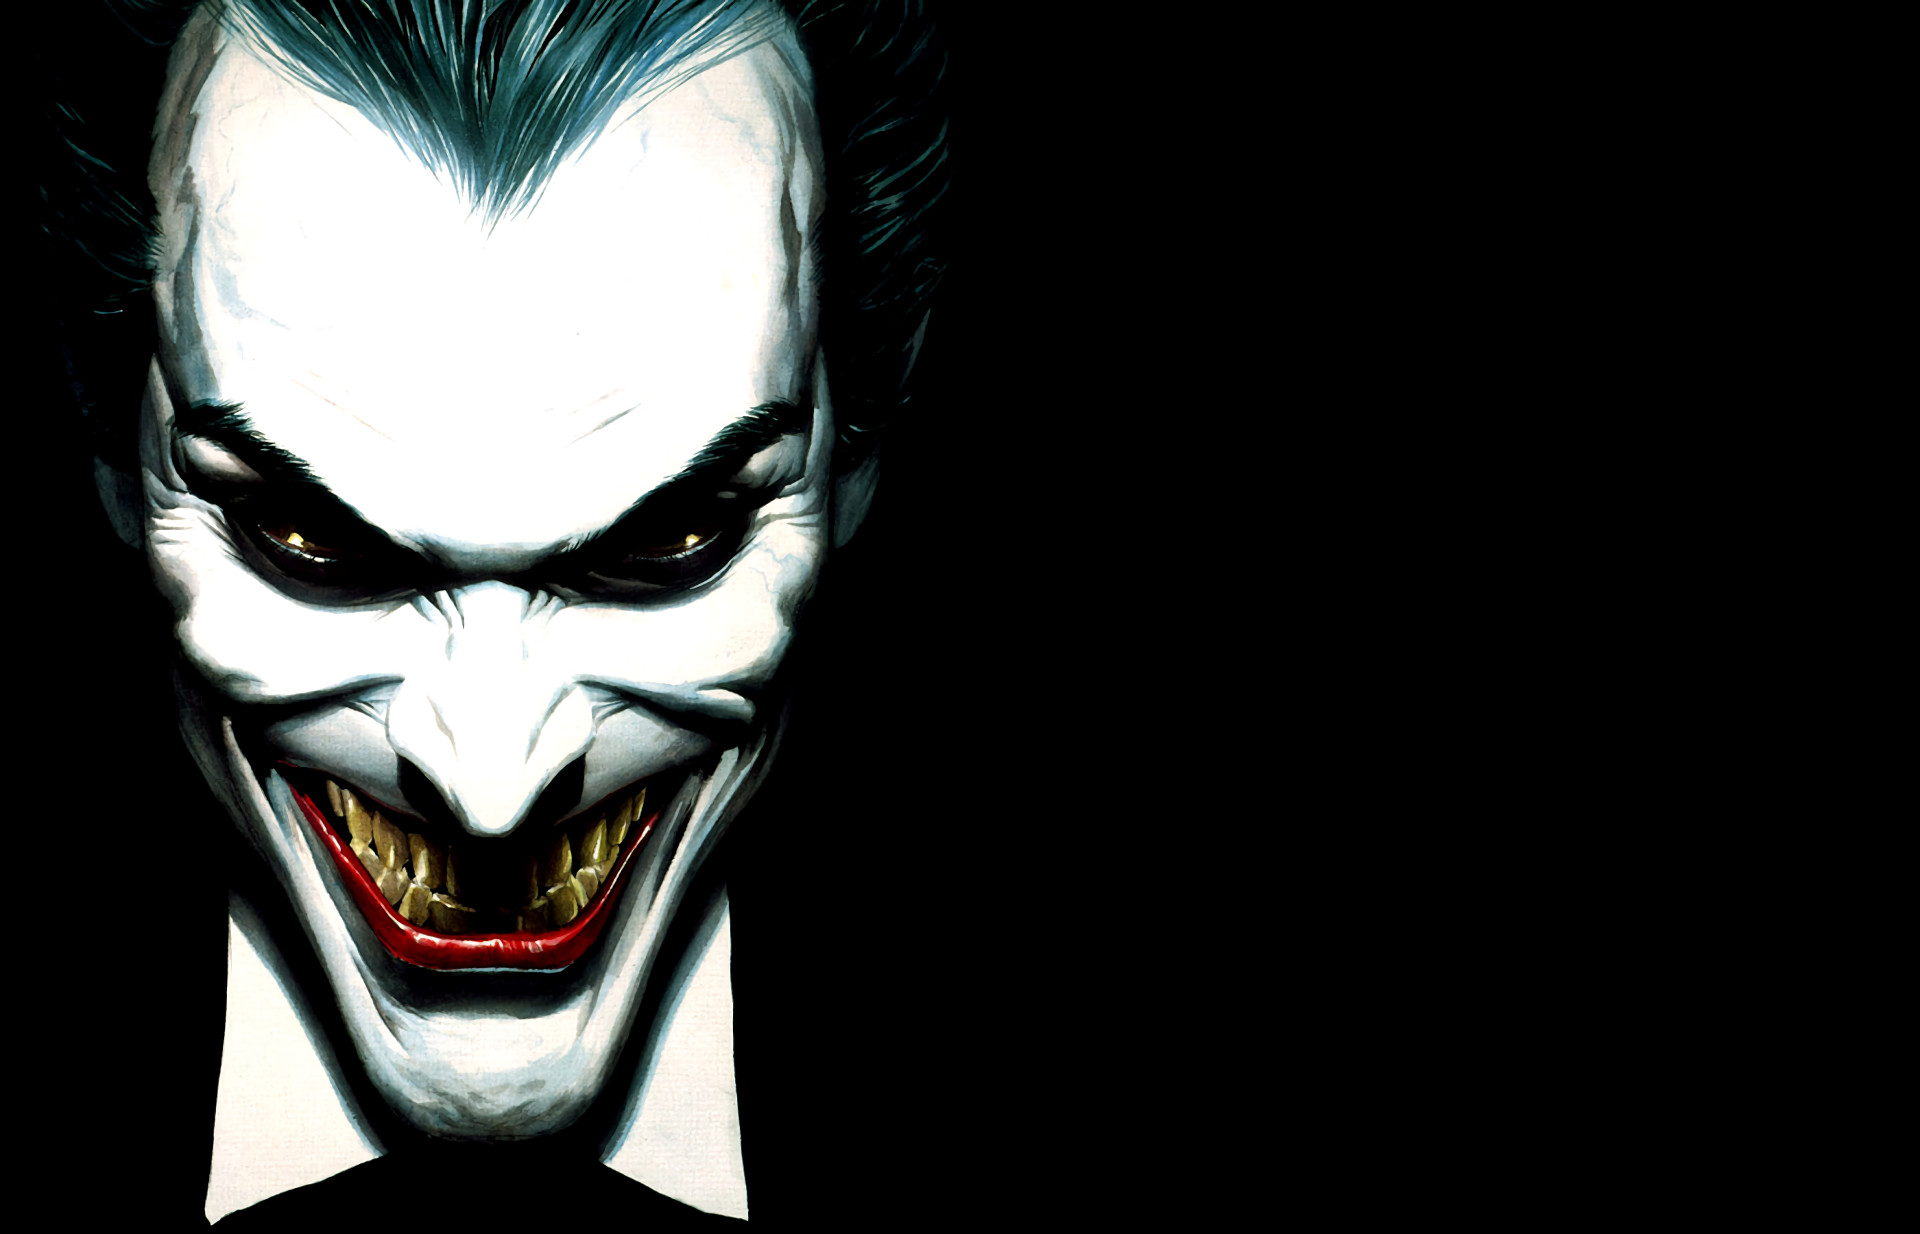 1920x1234 ... Scary Clown Wallpapers HD - Google Play Store revenue & download .